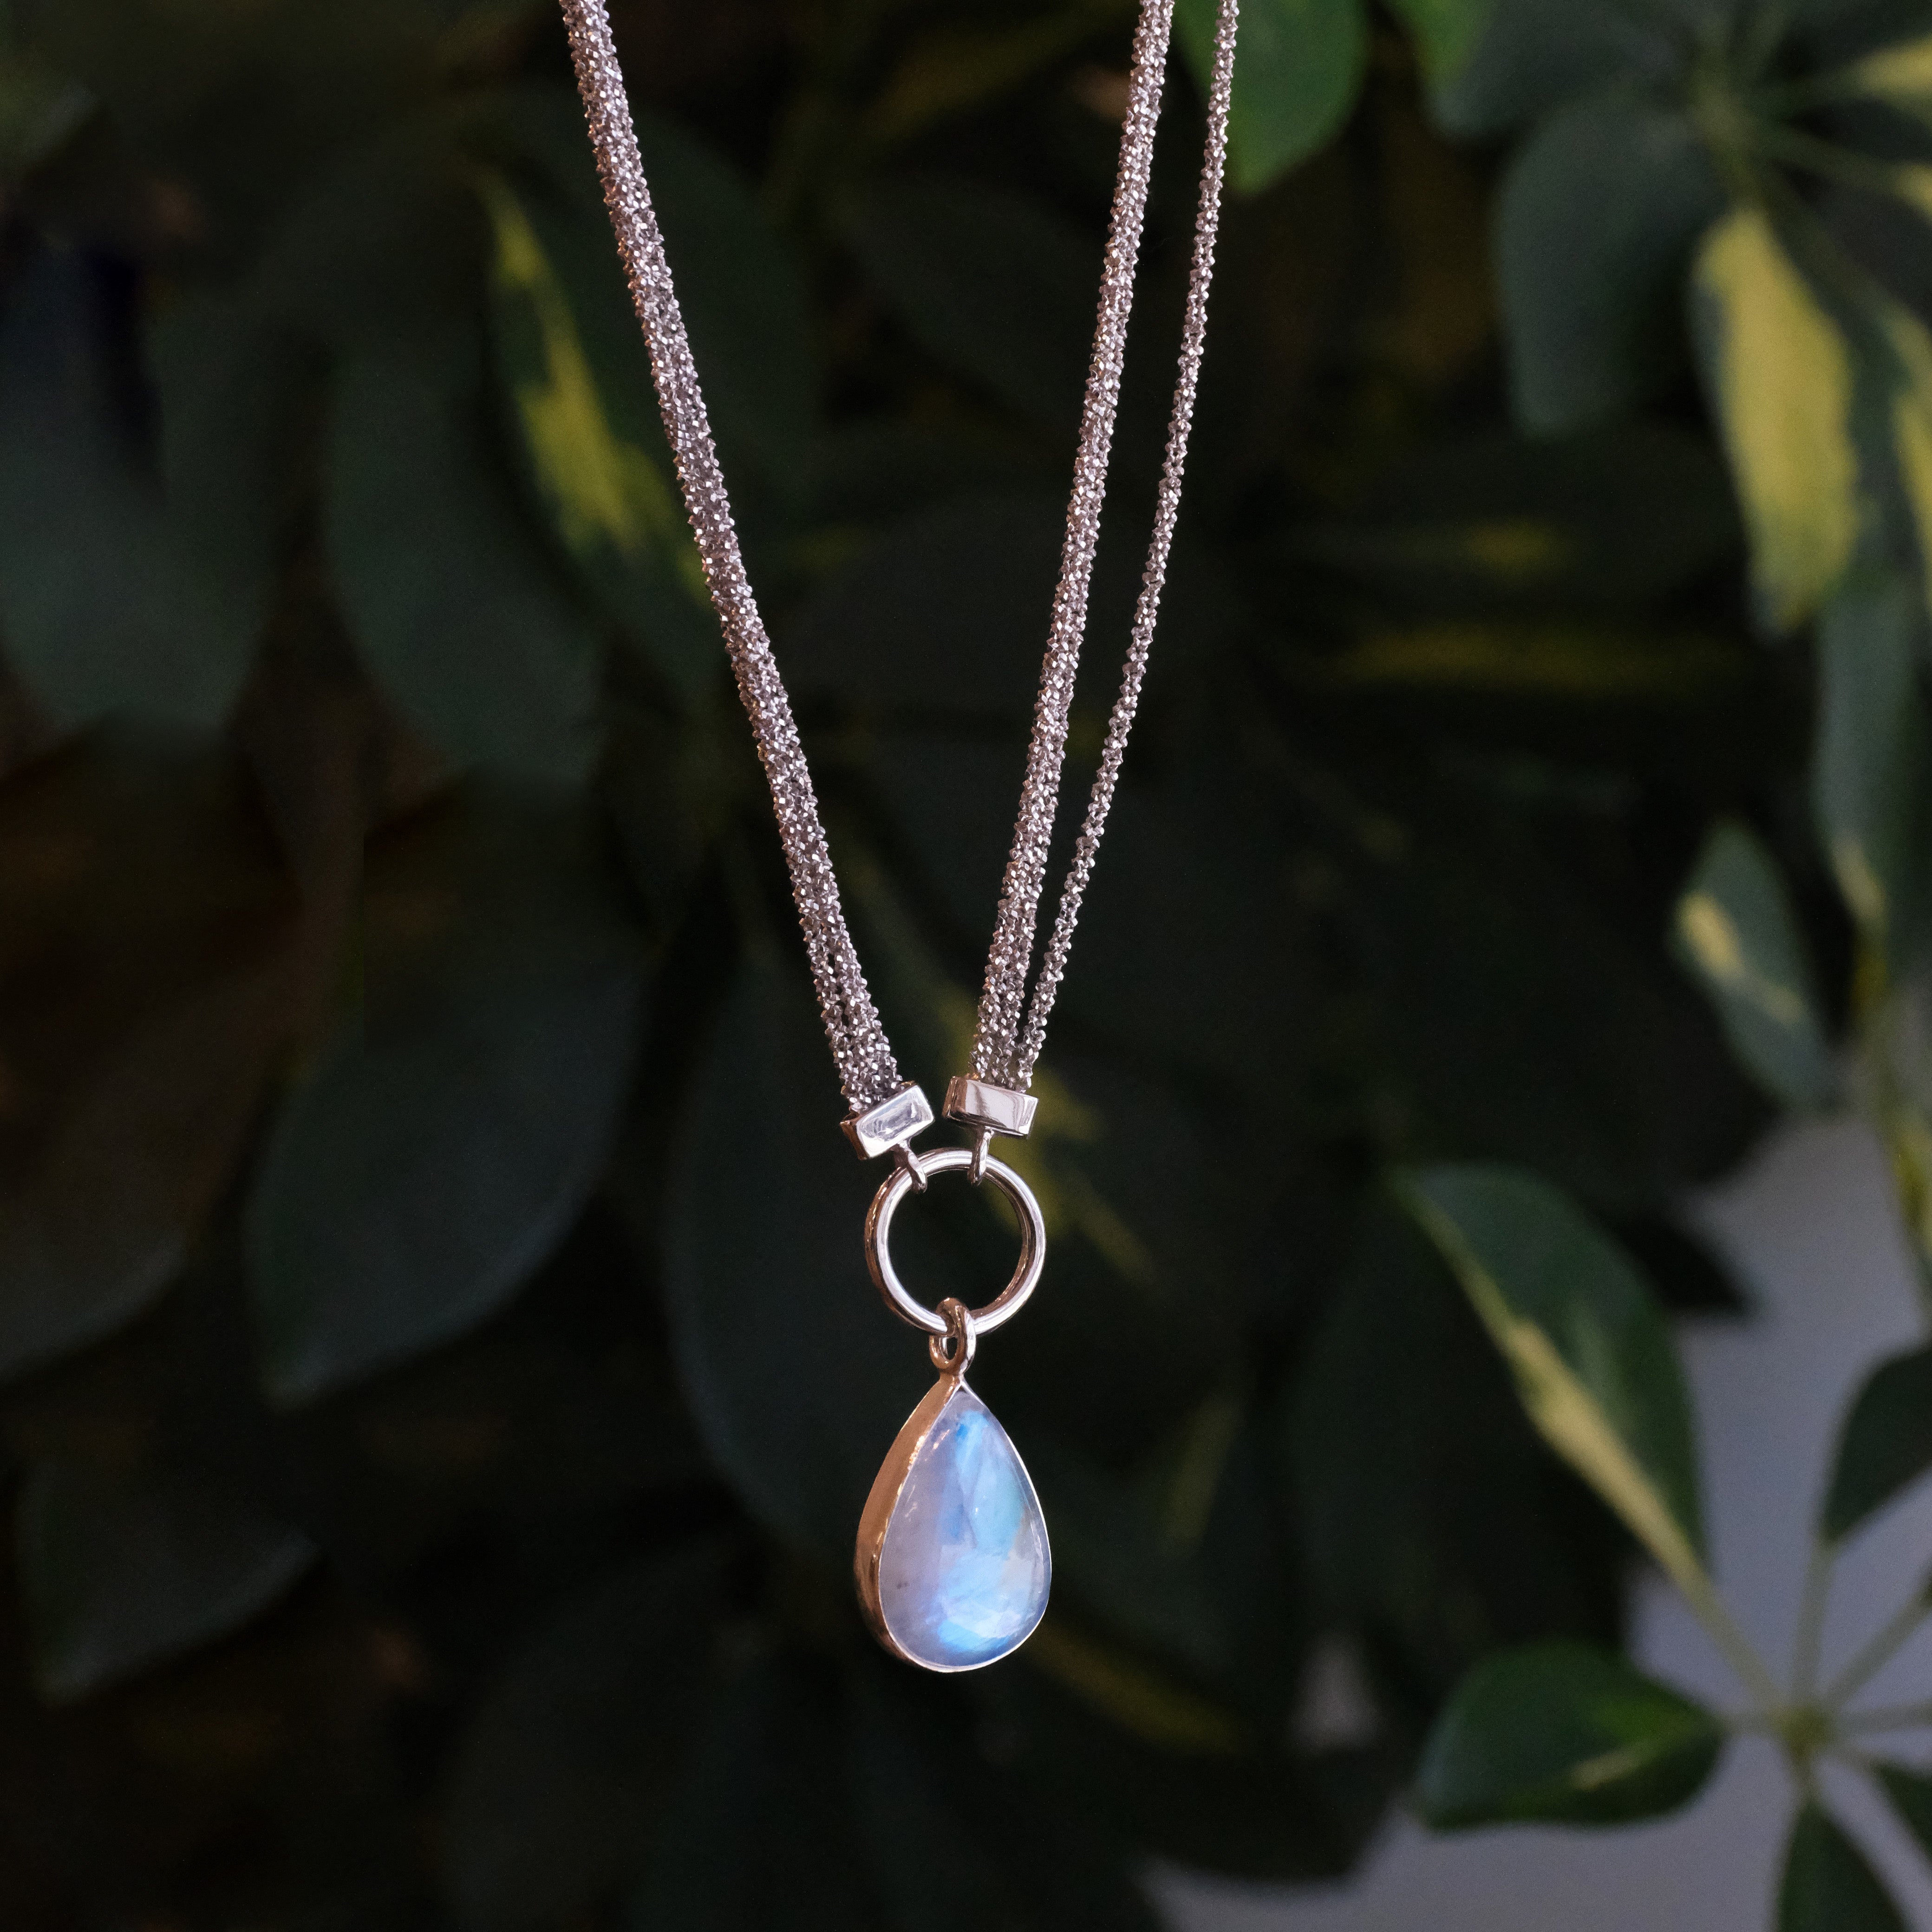 Moonstone + Sterling Malta Necklace - One of a Kind